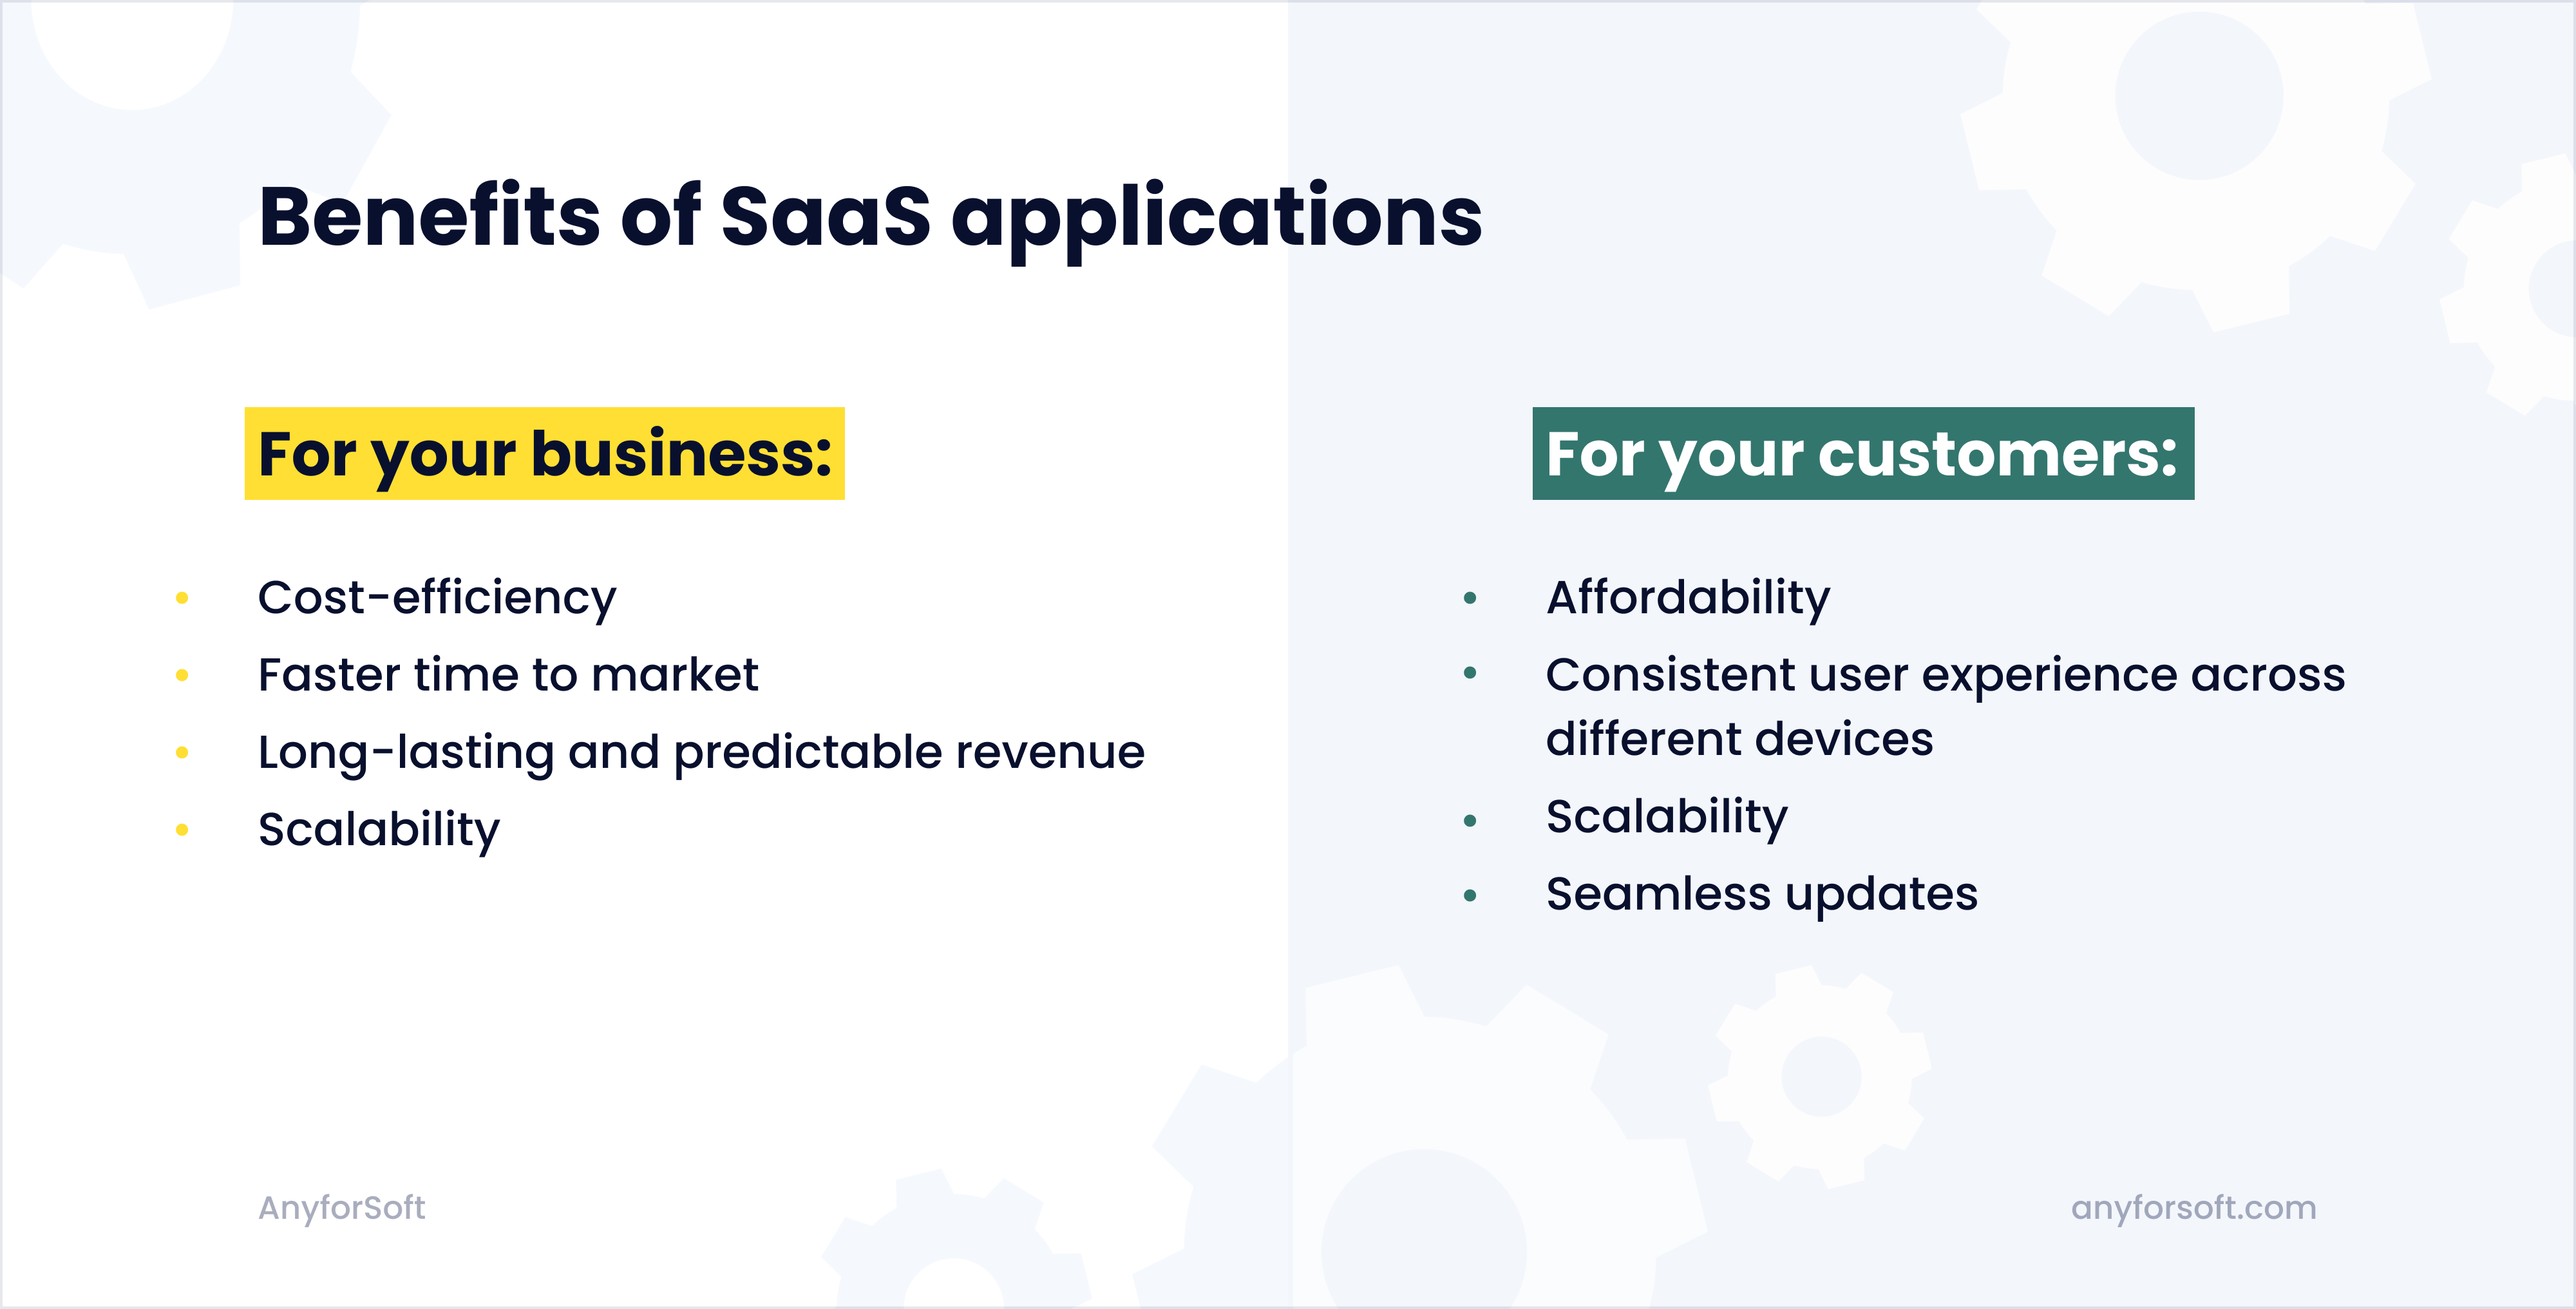 Benefits of SaaS application for your business and your customers